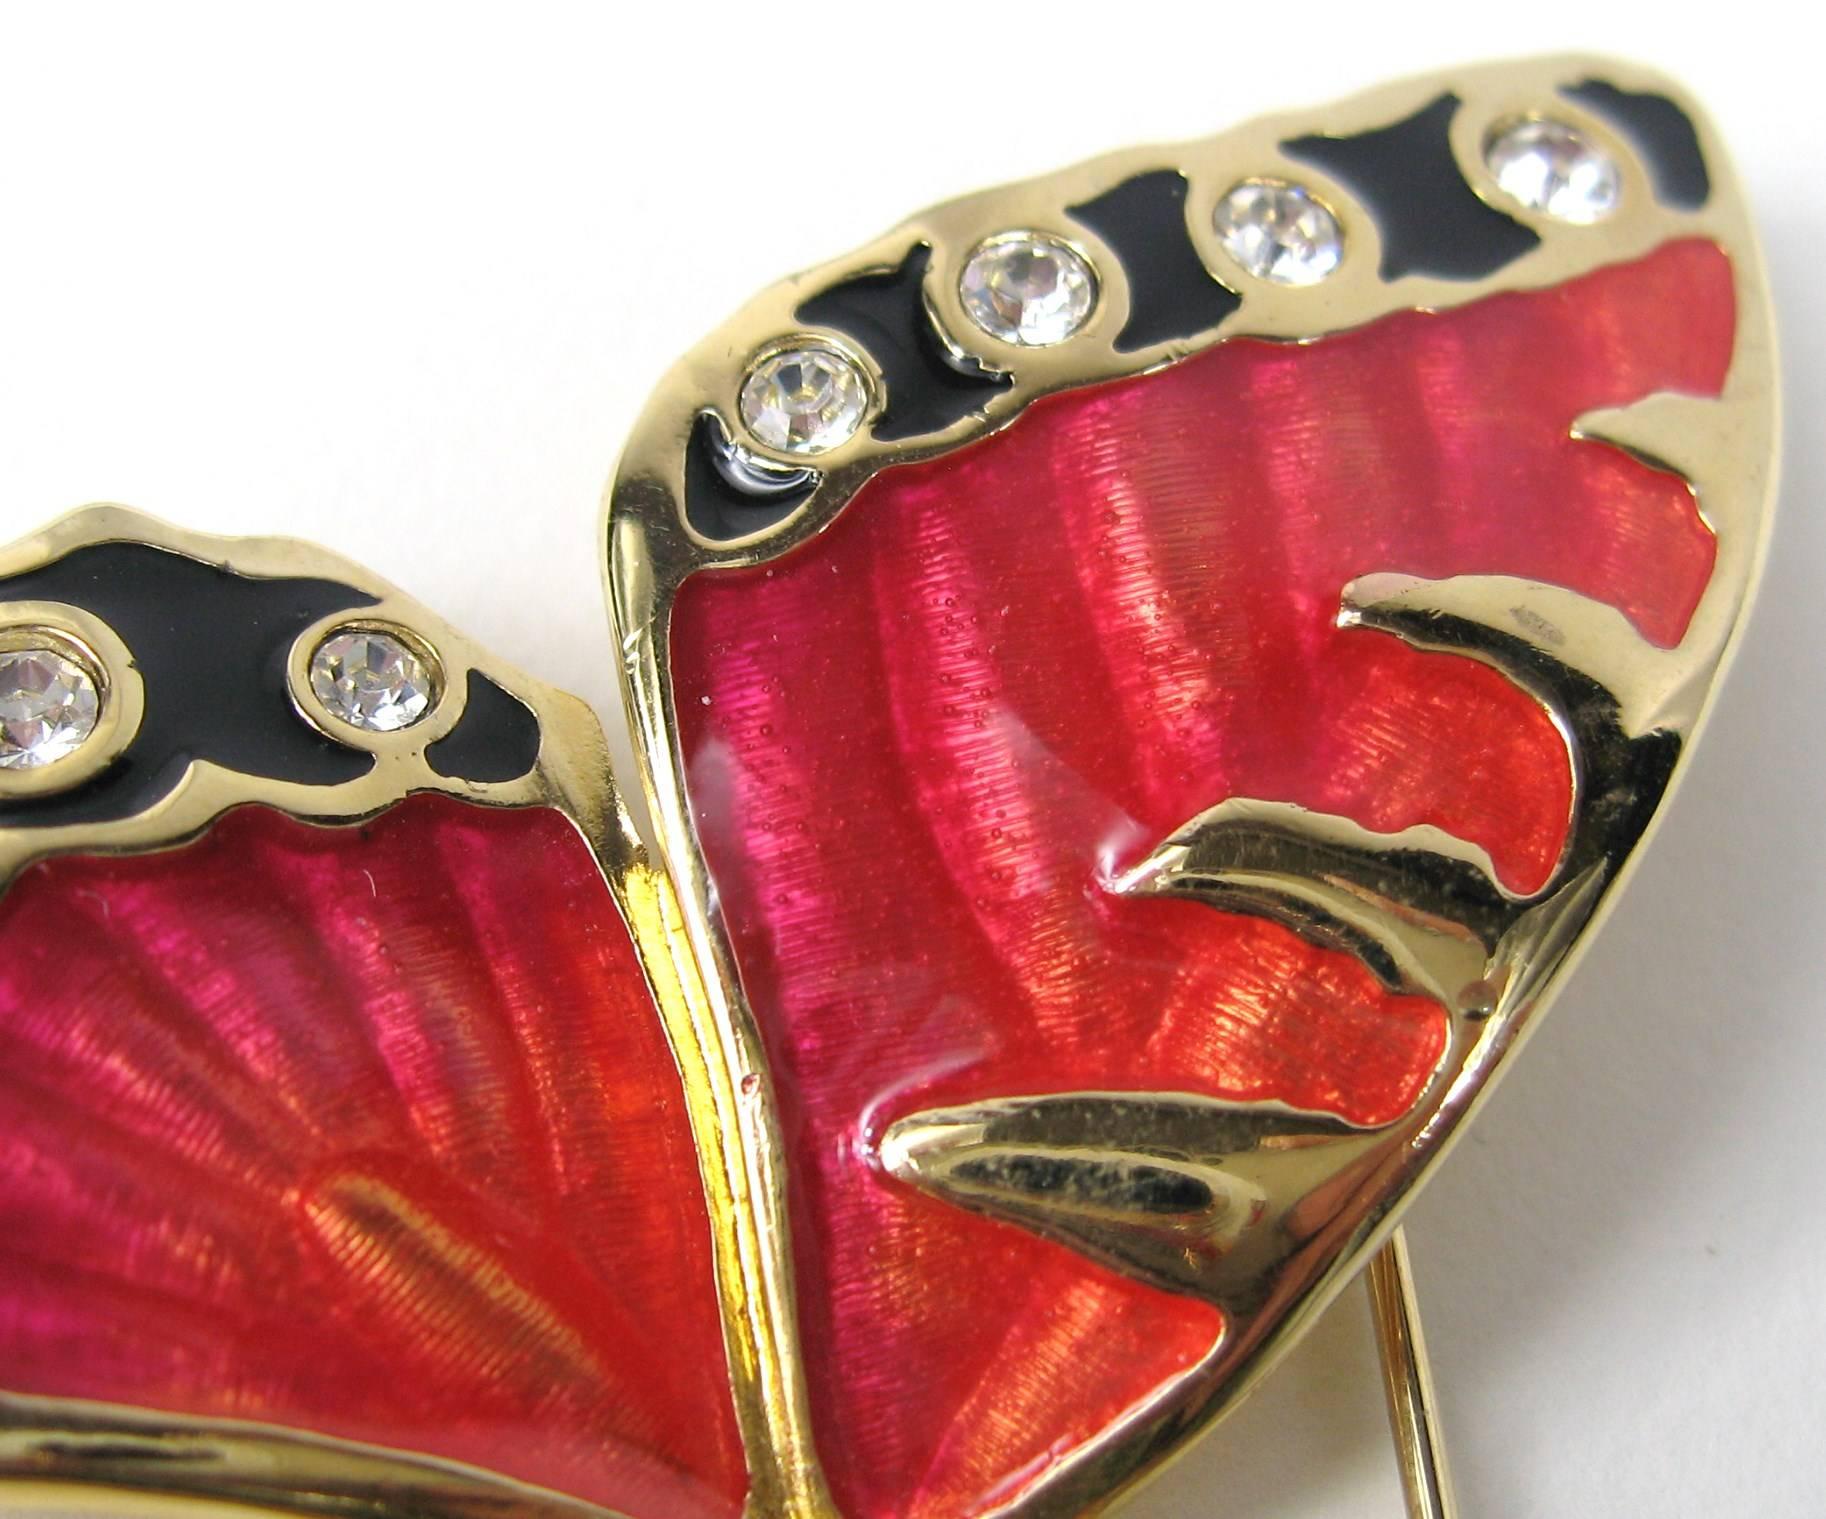 Very Large Swarovski Red and Black enameled Butterfly Brooch. Measuring 2.98-inch x 2.34 inch. This is out of a massive collection of New Old stock items as well as  Hopi, Zuni, Navajo, Southwestern, sterling silver, (costume jewelry that was not